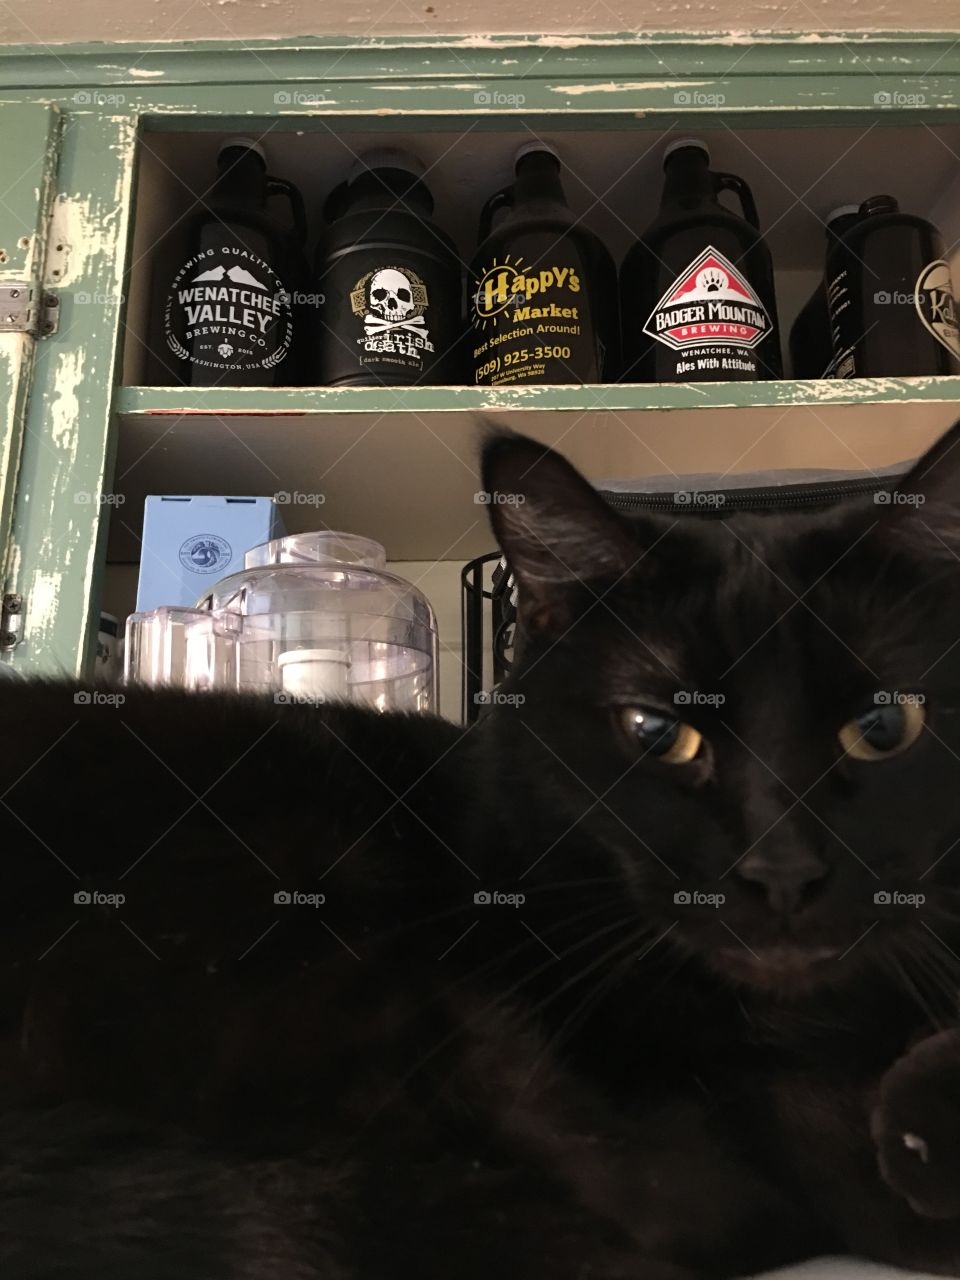 Cat sitting on the fridge with growlers in the background.